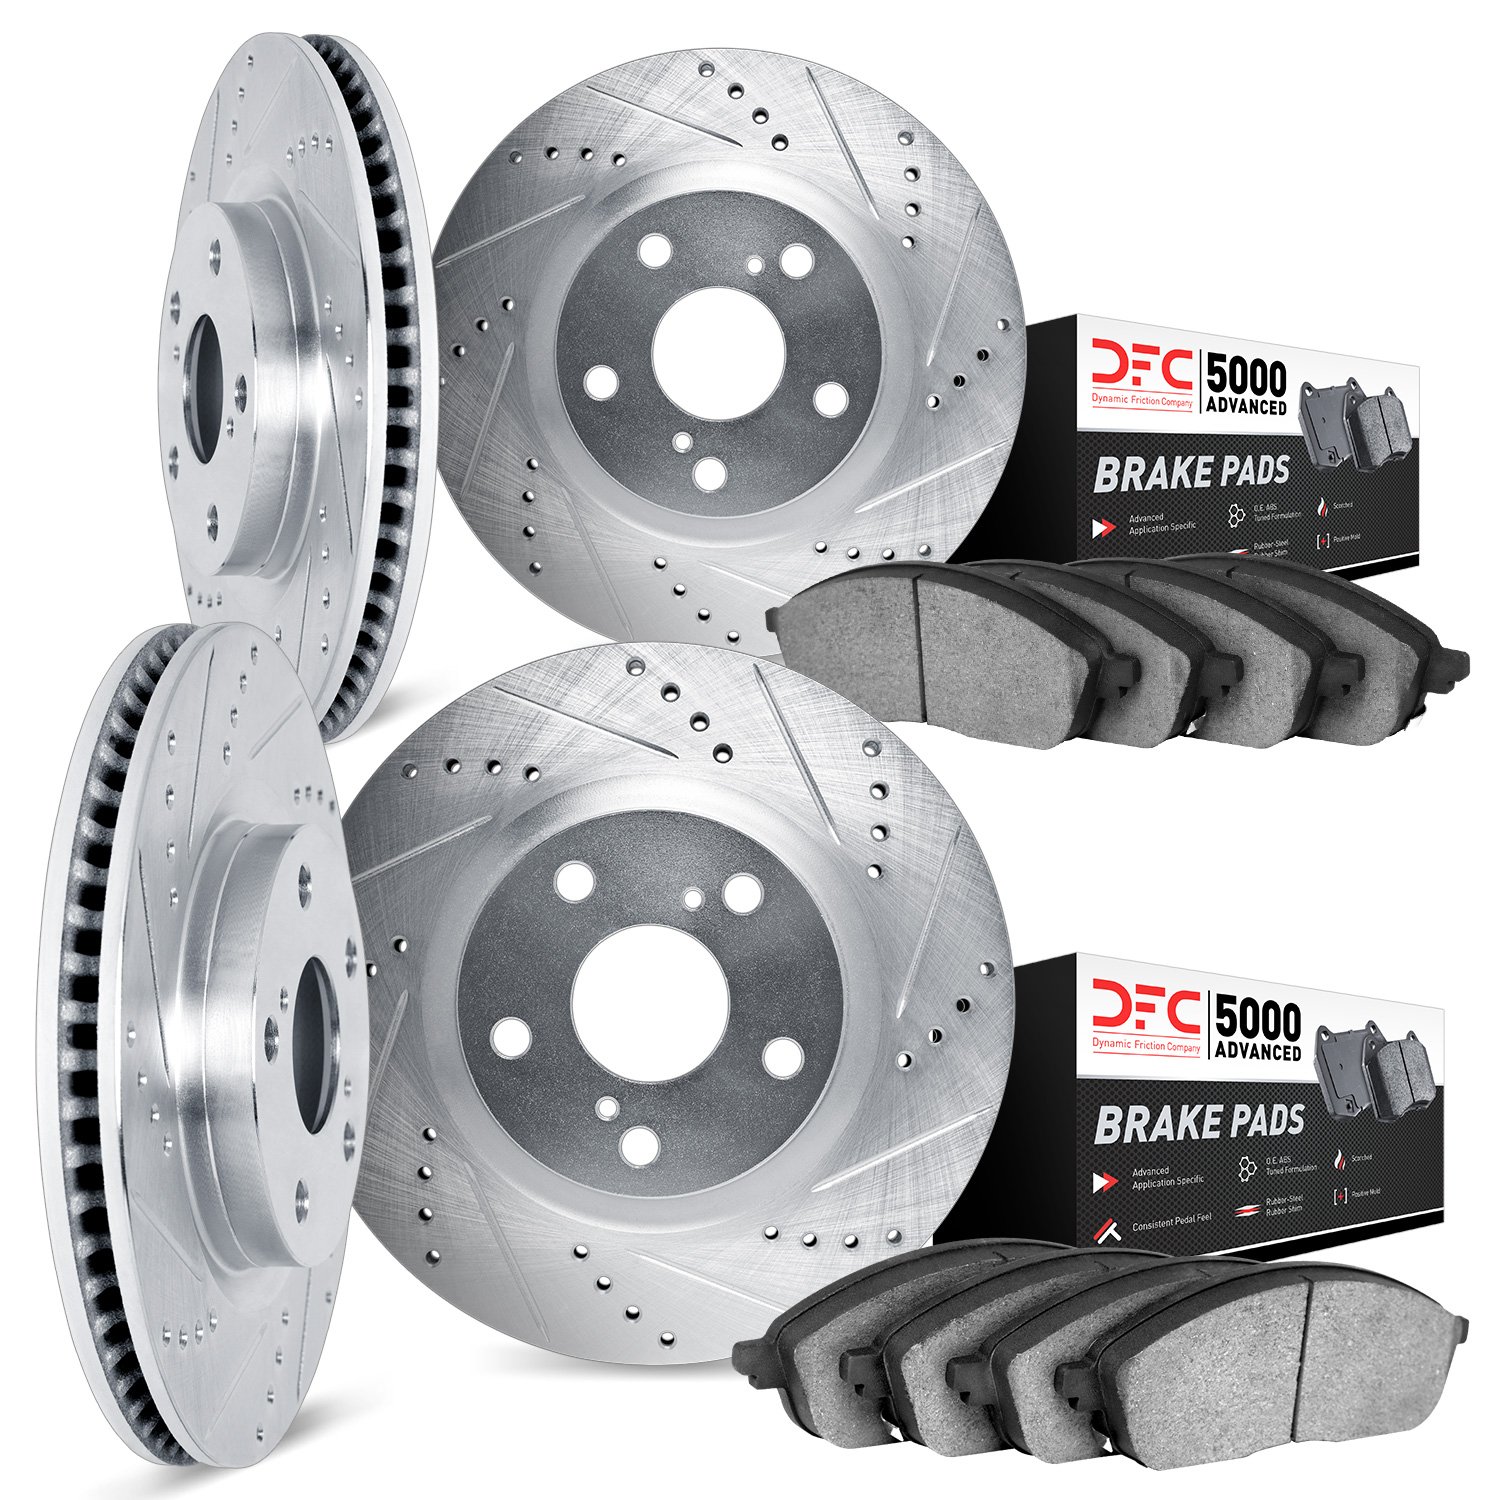 7504-48005 Drilled/Slotted Brake Rotors w/5000 Advanced Brake Pads Kit [Silver], 1998-2005 GM, Position: Front and Rear